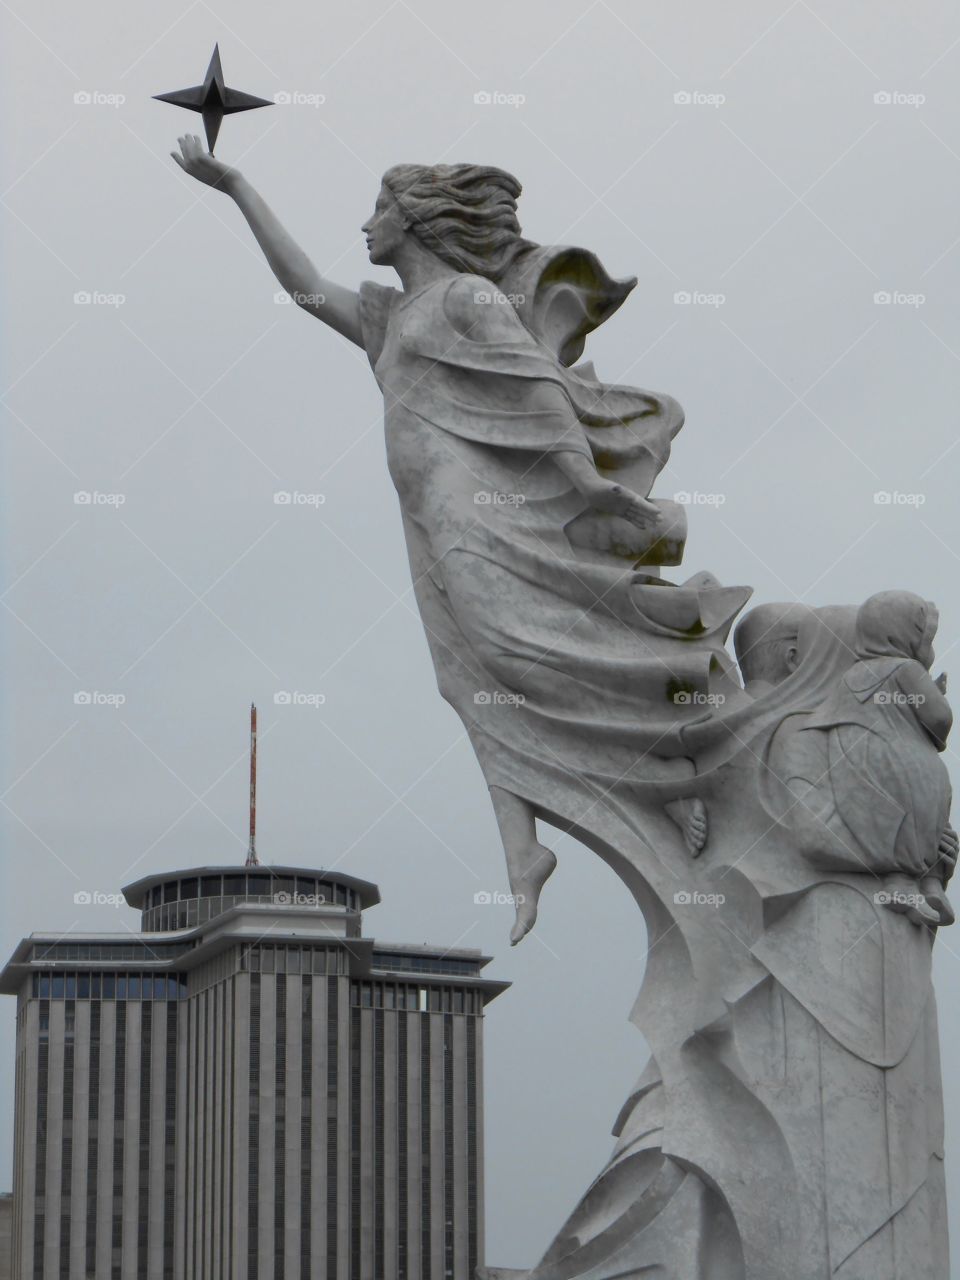 Different perspective of Immigrant monument. Angel watching over them?